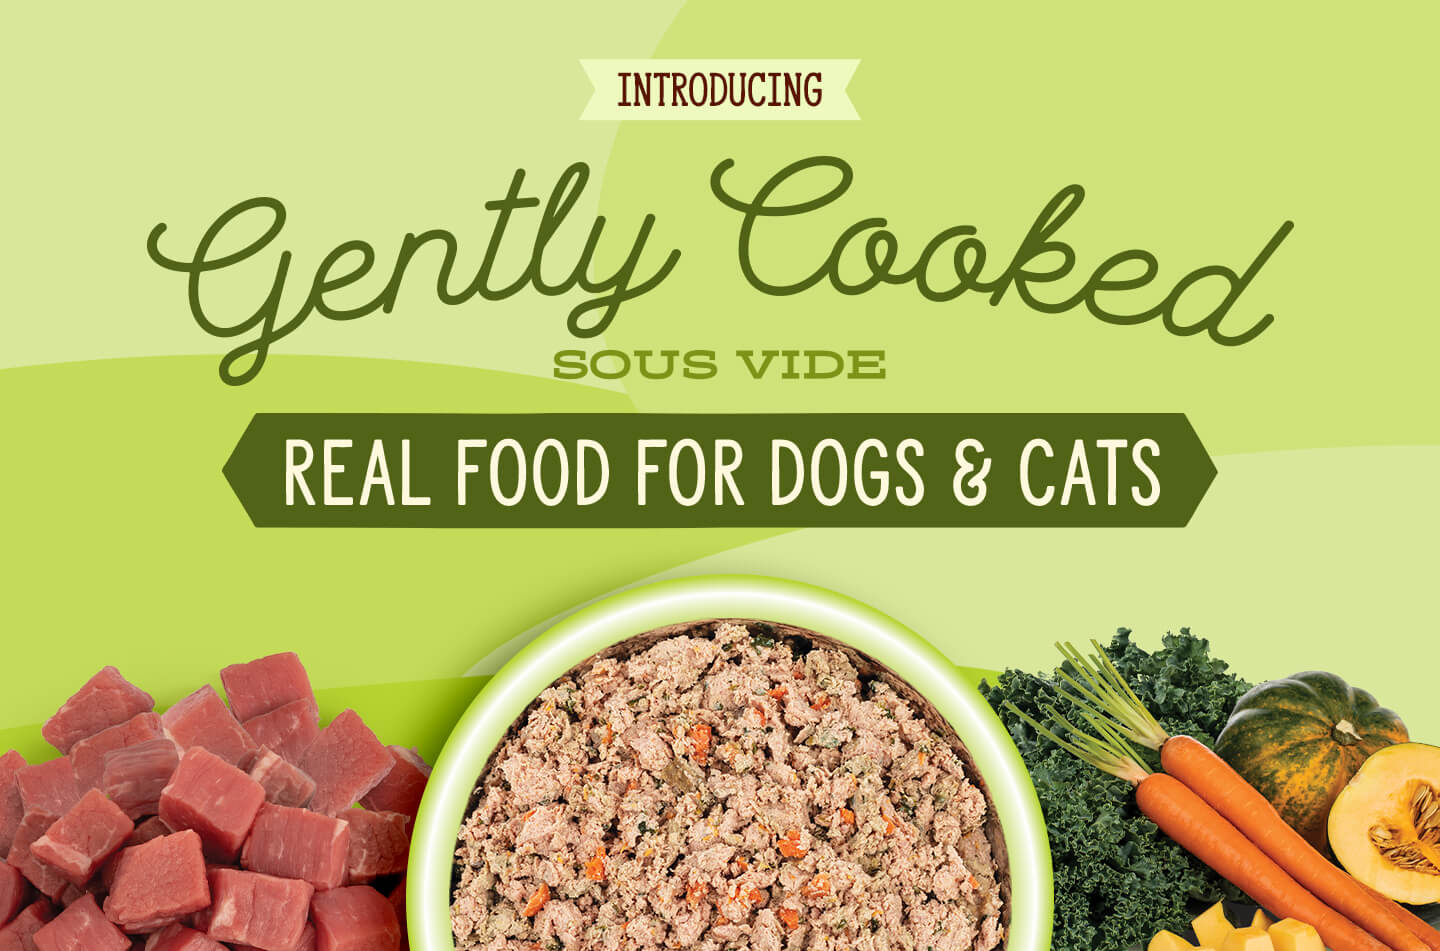 PRIMAL PET FOODS INTRODUCES ‘GENTLY COOKED’ LINE OF FOOD